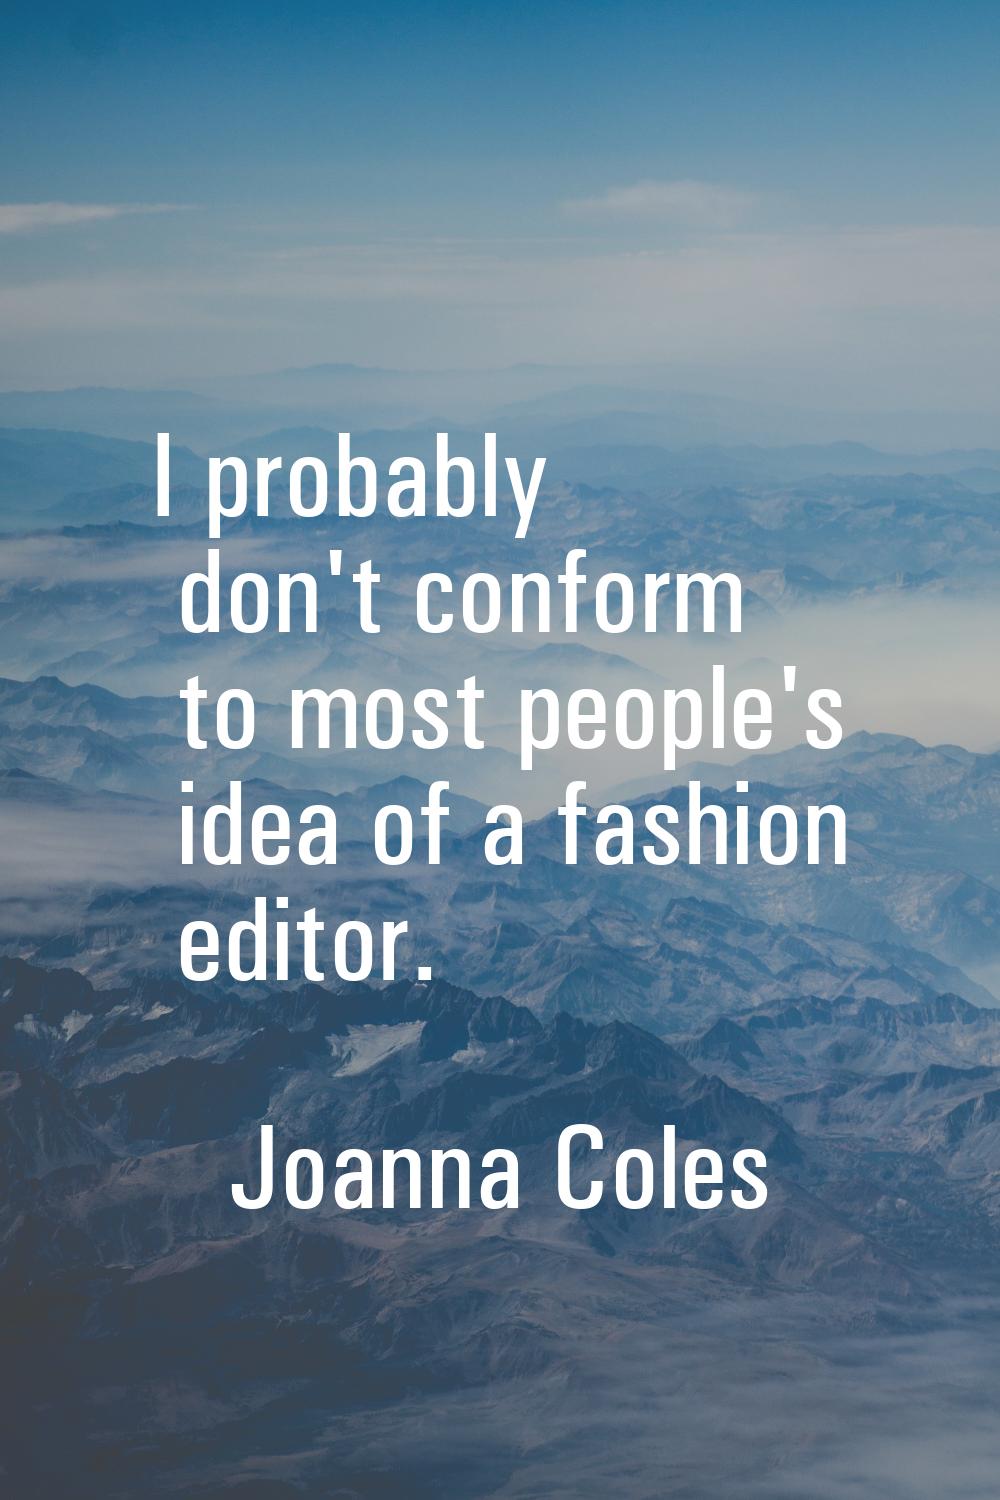 I probably don't conform to most people's idea of a fashion editor.